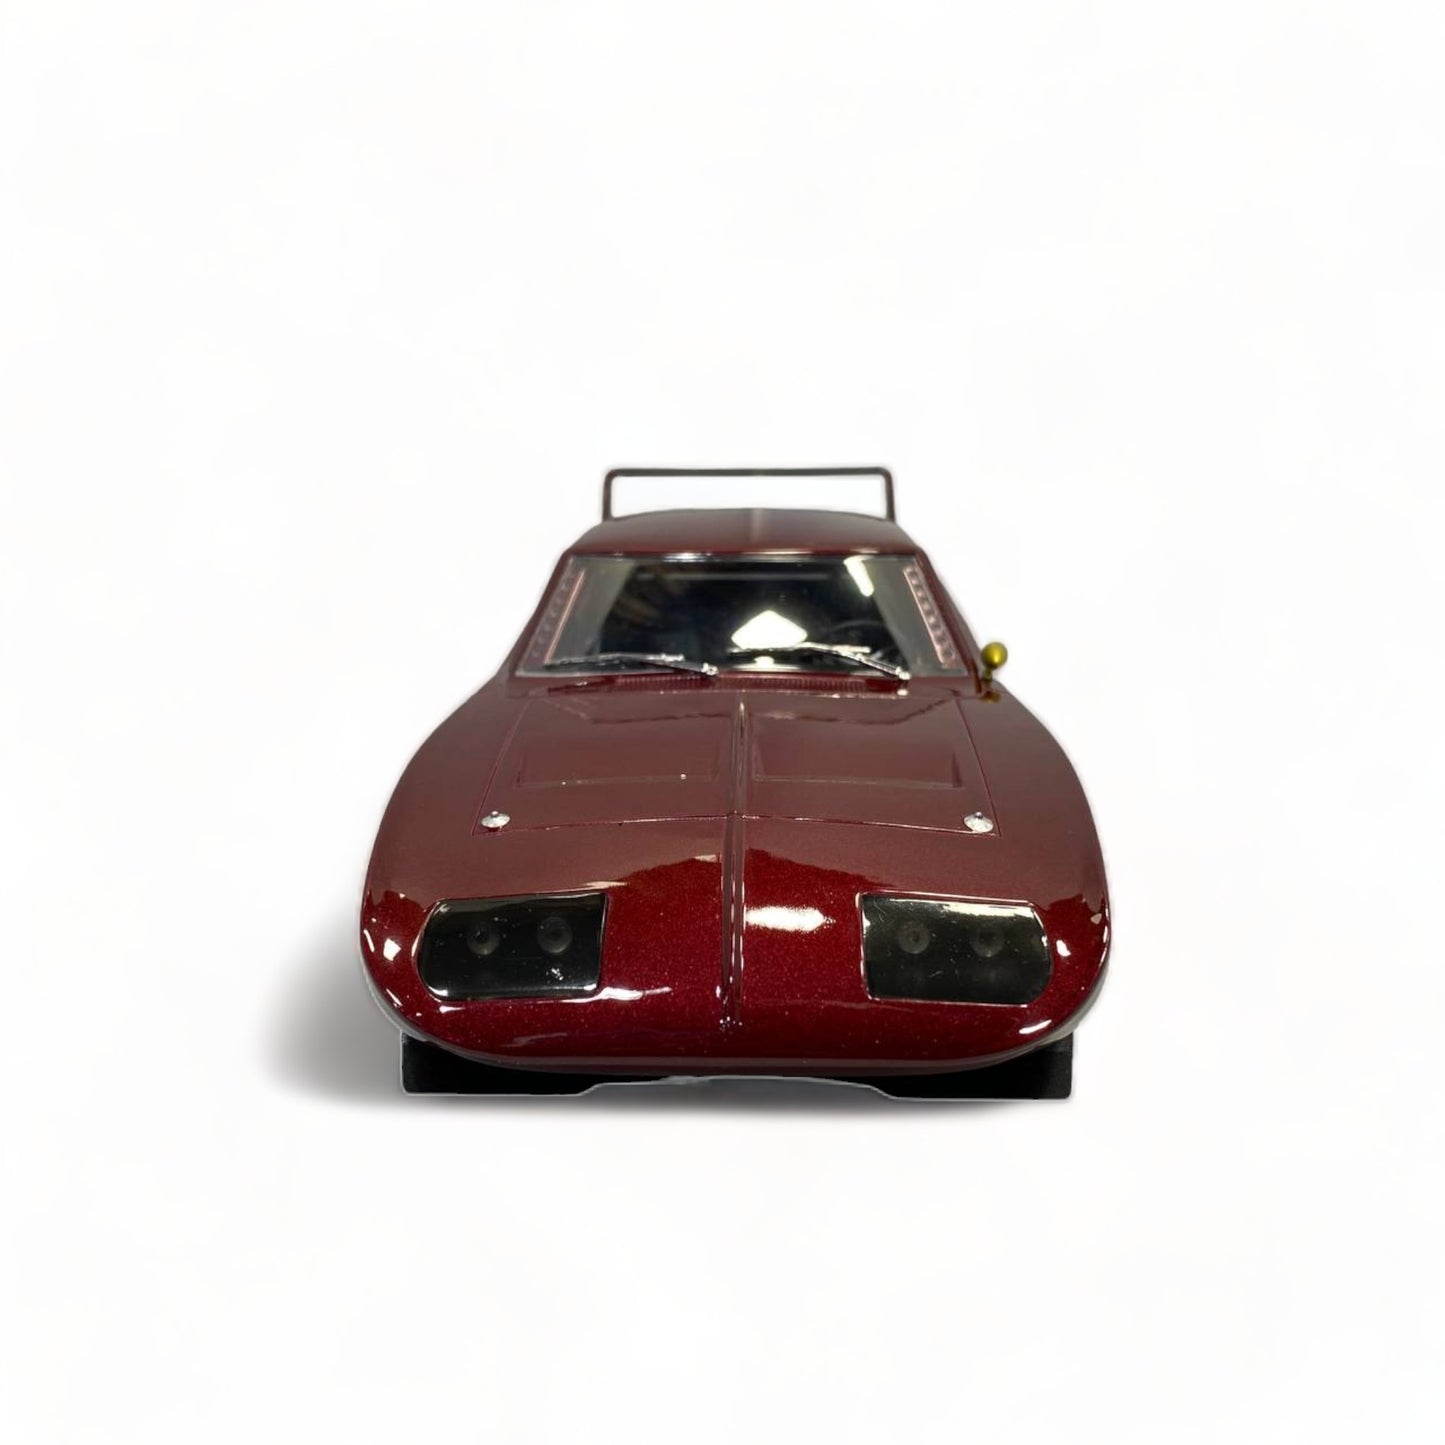 Greenlight Dodge Charger Daytona Fast & Furious - Maroon (1969, 1/18 Scale)